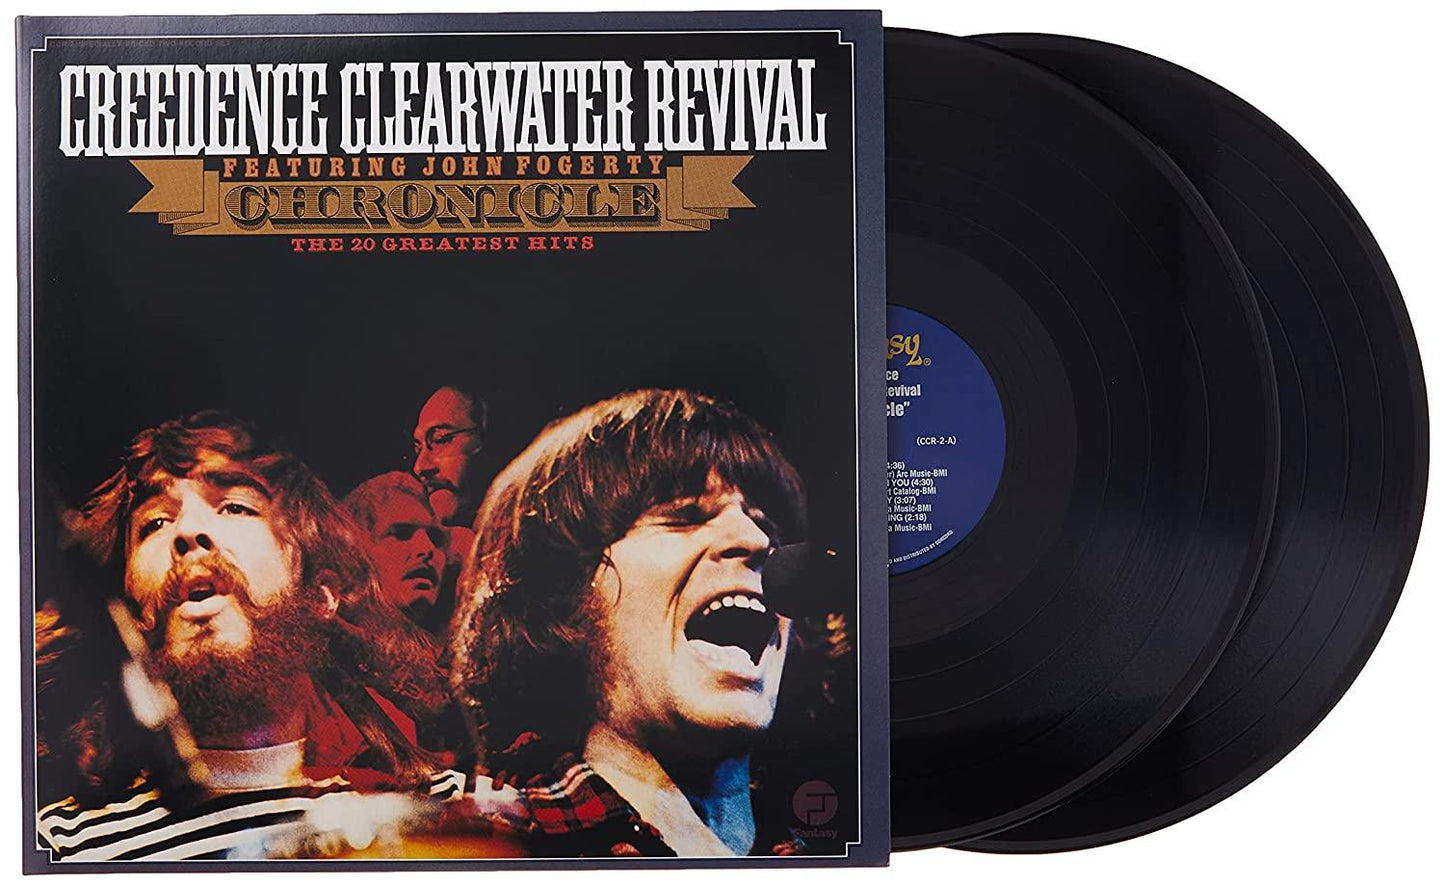 Creedence Clearwater Revival - Chronicle: The 20 Greatest Hits (2 LP) - Joco Records